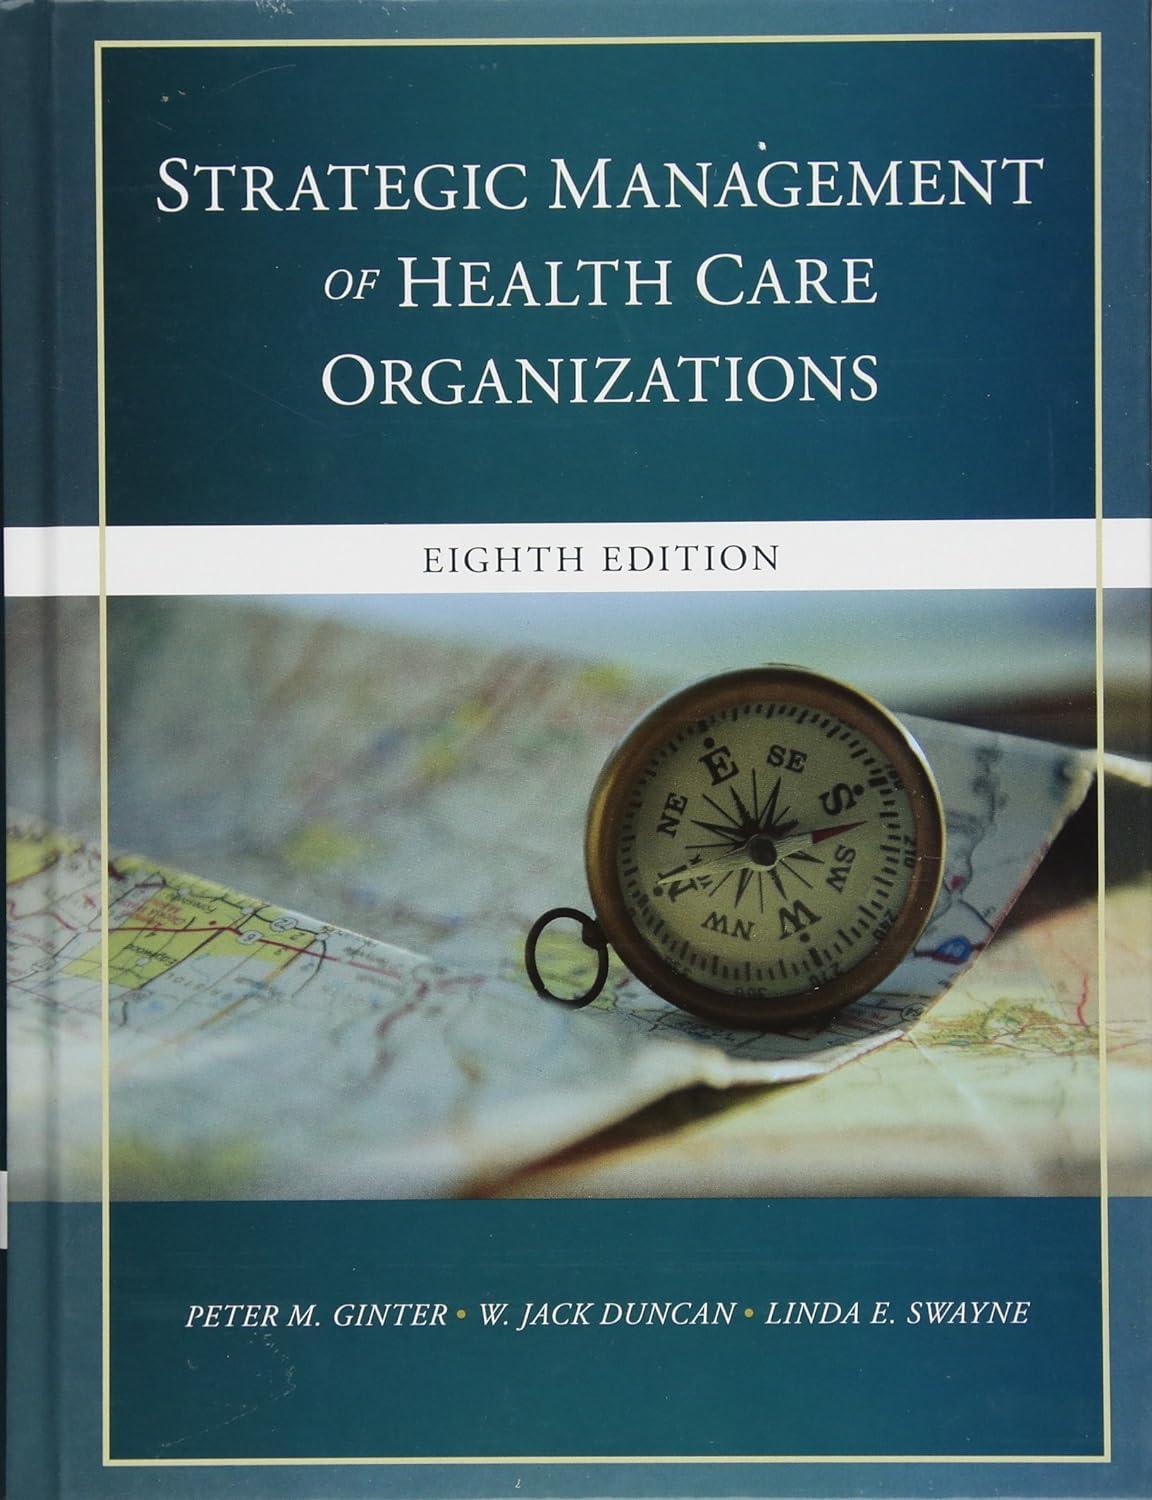 the strategic management of health care organizations 8th edition peter m. ginter , w. jack duncan , linda e.